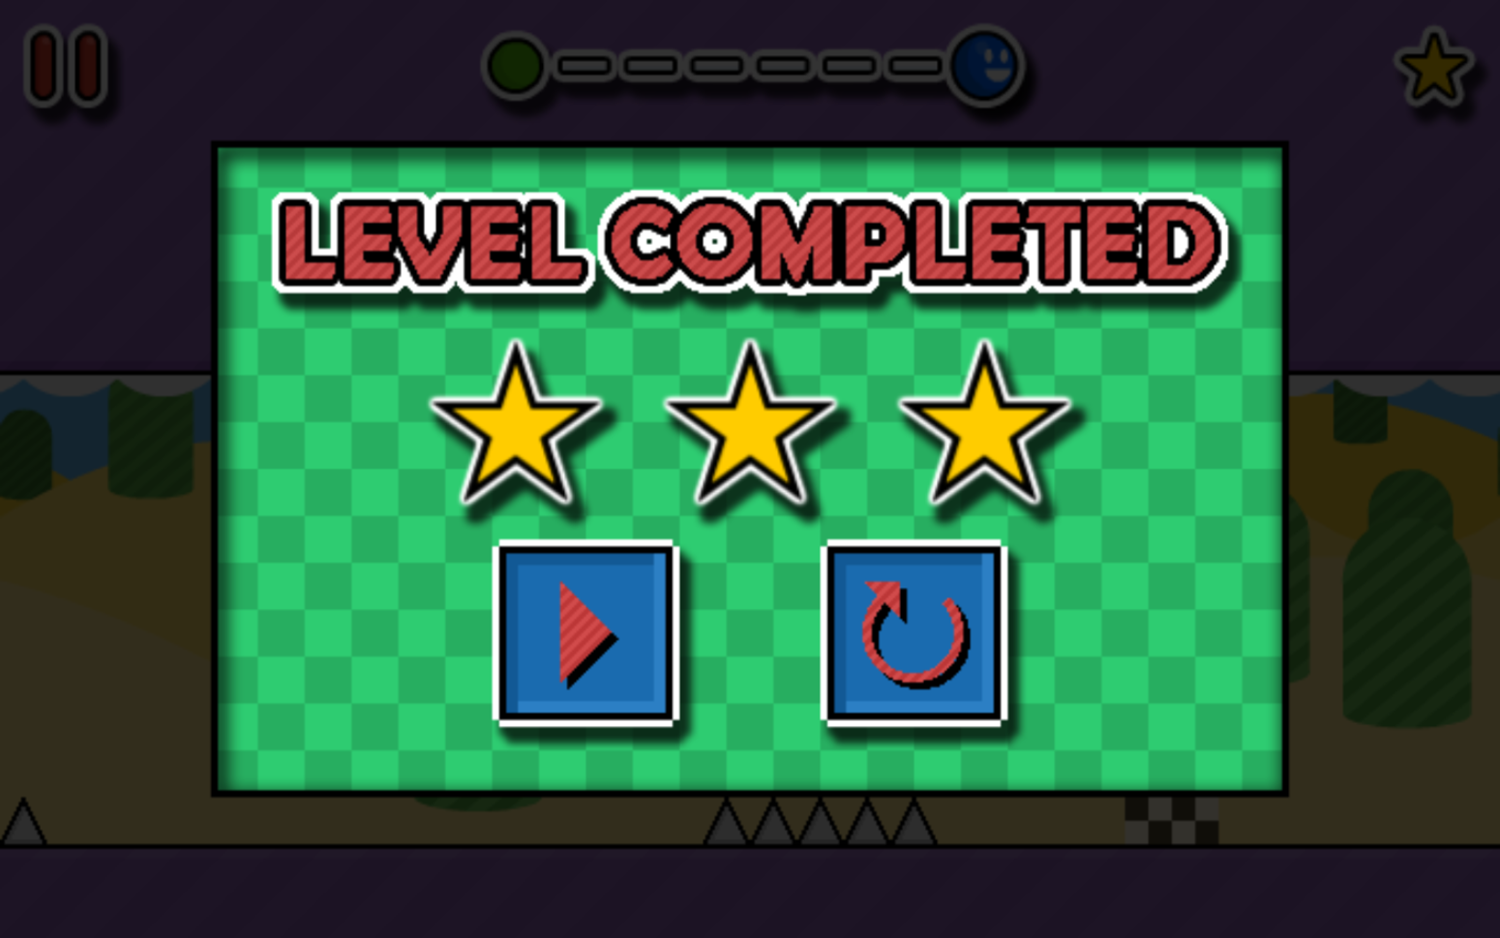 Gravity Run Game Level Completed Screenshot.